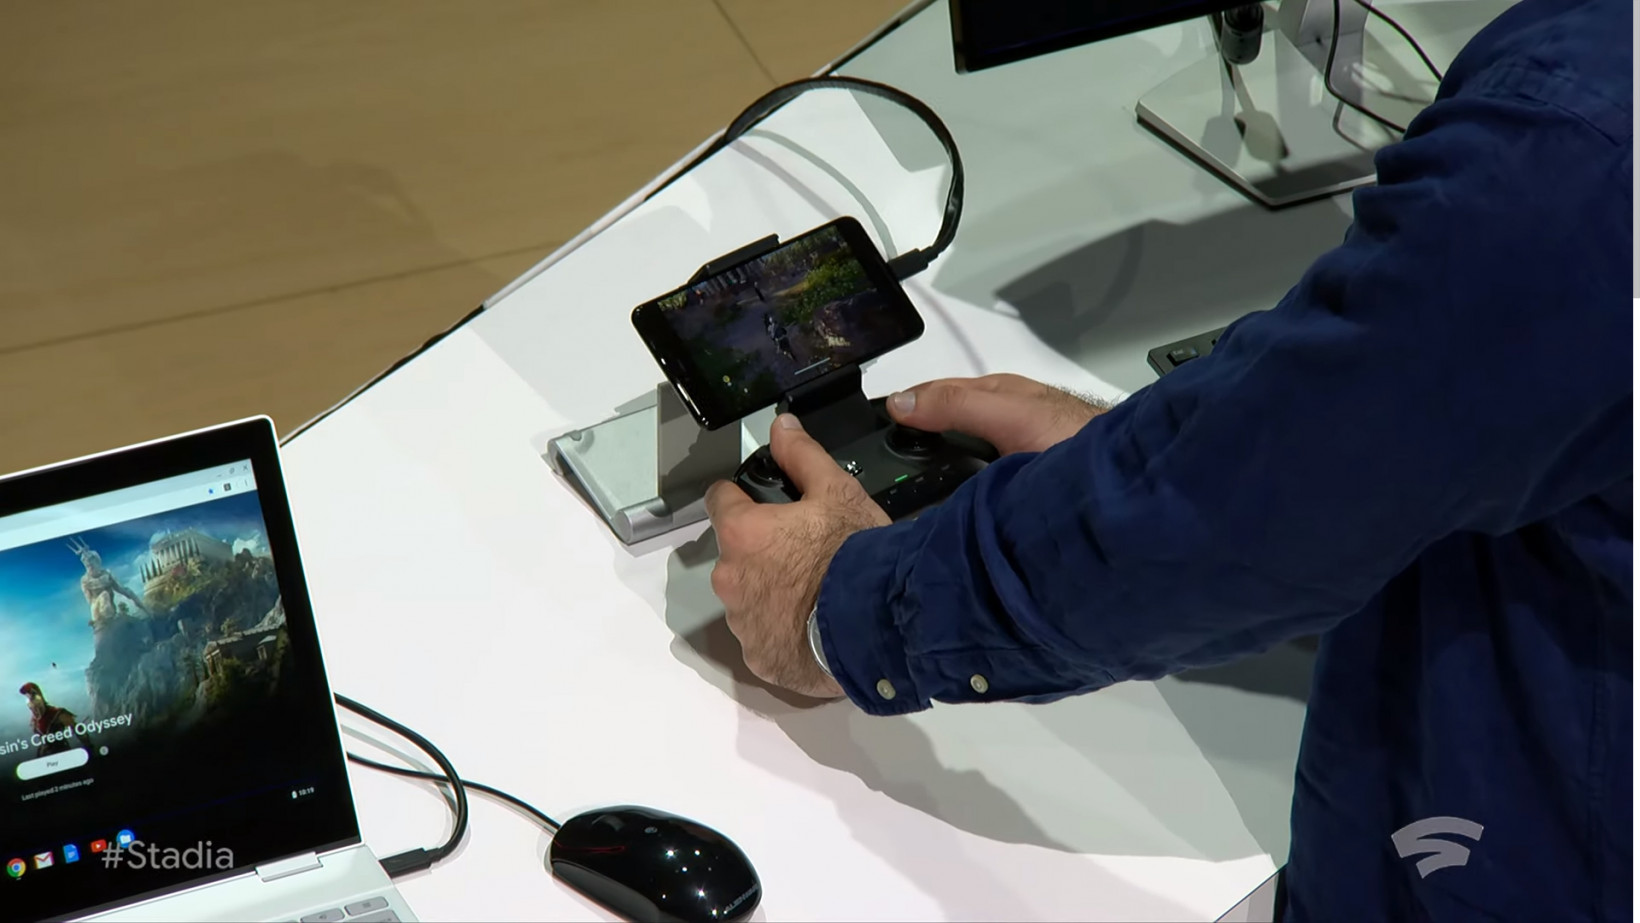 Google demonstrated how you could pick up a game from where you left off across devices, seamlessly